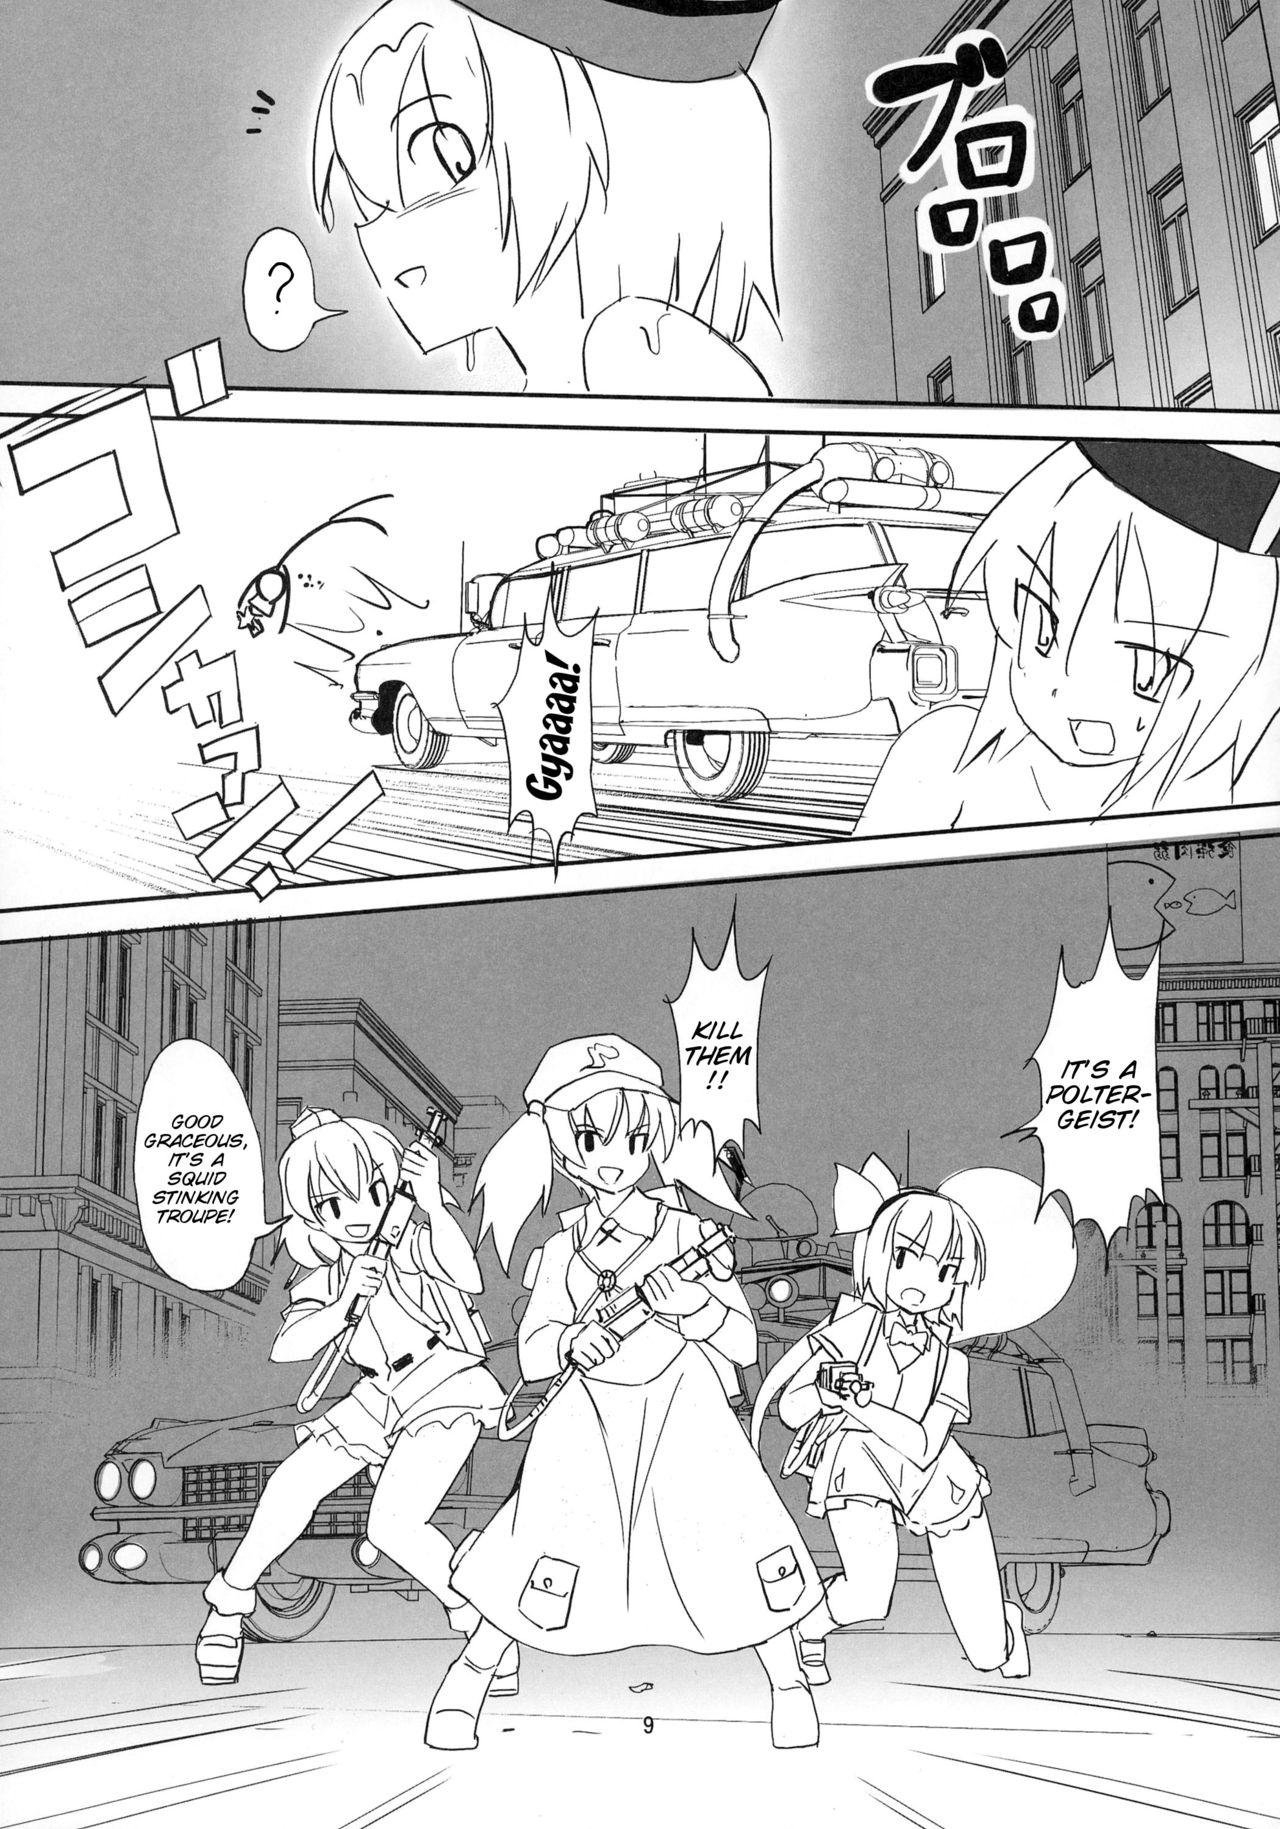 Putita TFC BUSTERS - Touhou project Ghostbusters Reverse - Page 10